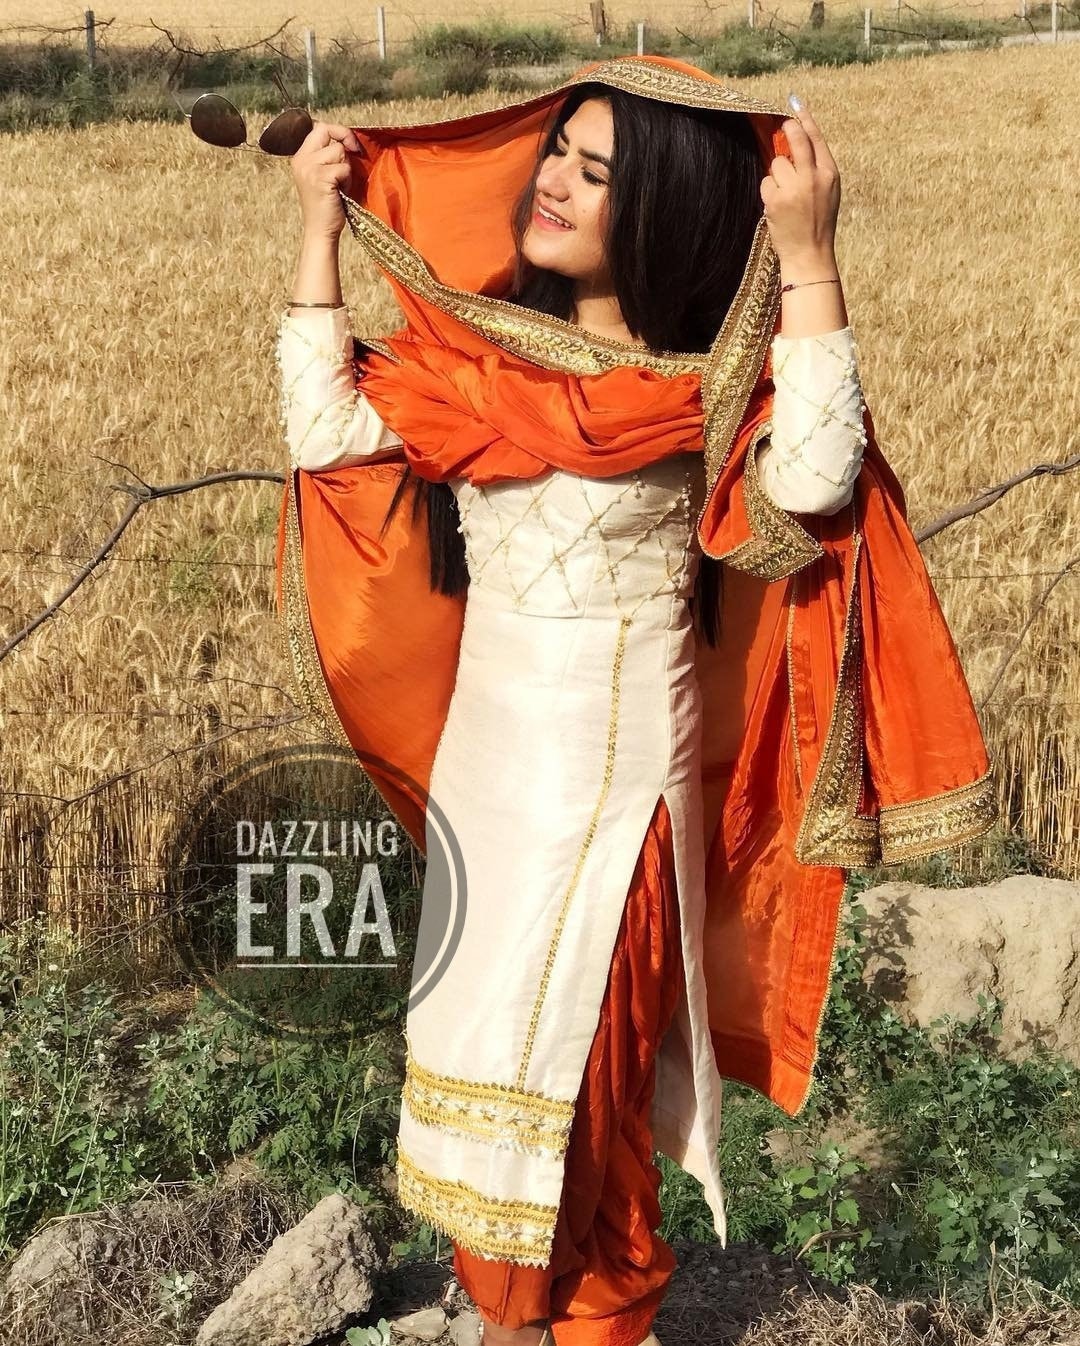 I absolutely love this Punjabi suit! : r/OUTFITS